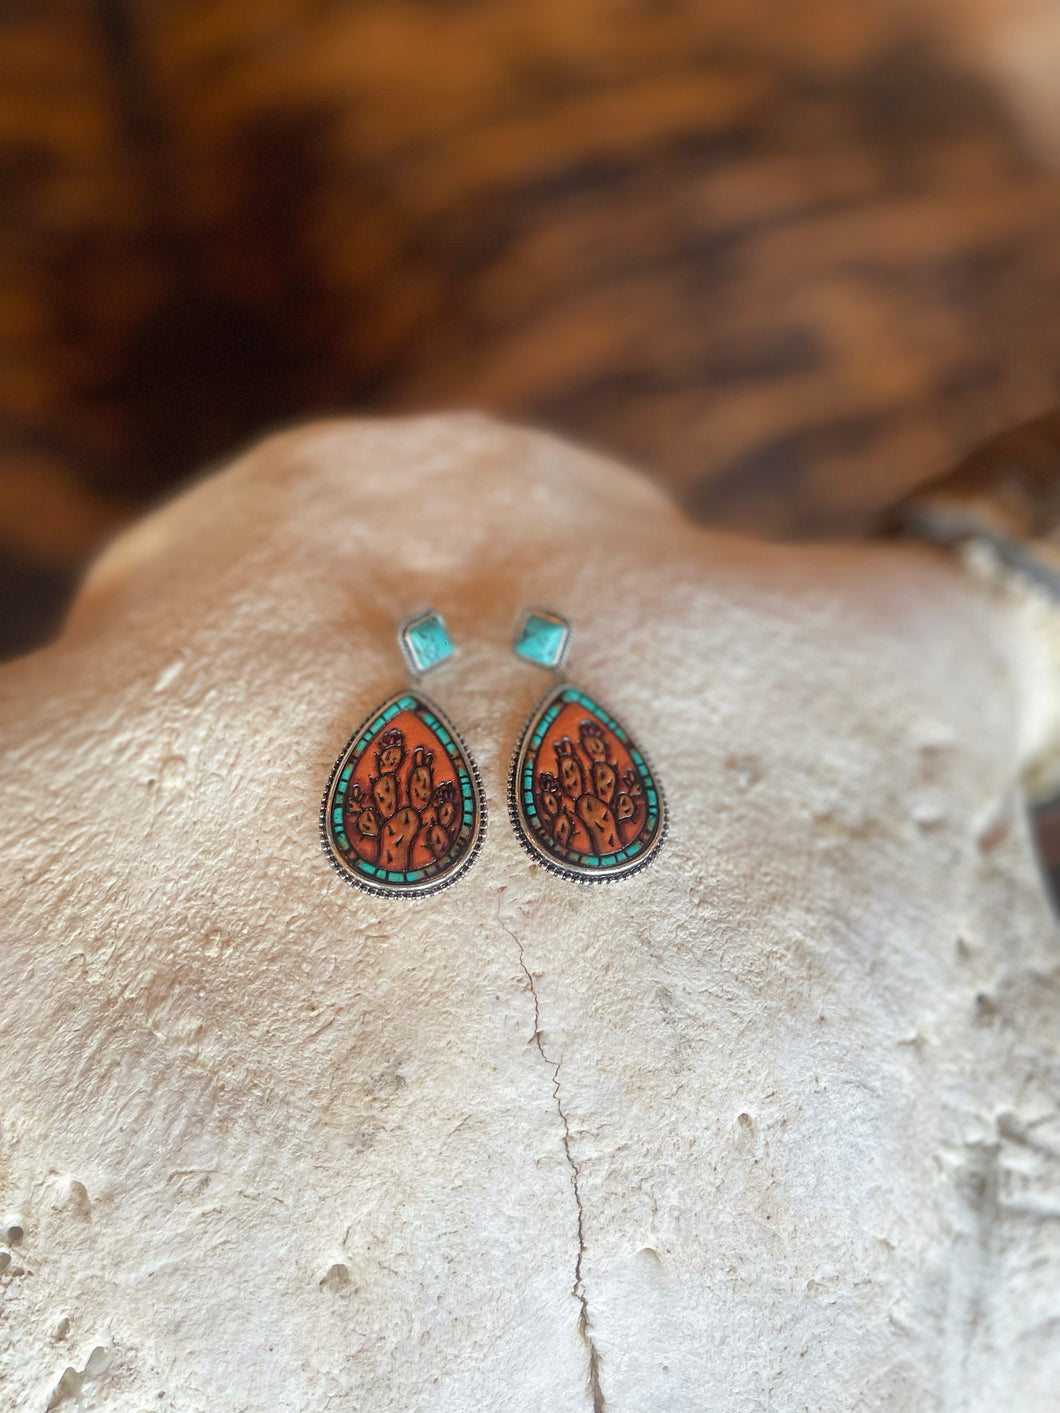 Leather Tooled Cactus Earrings